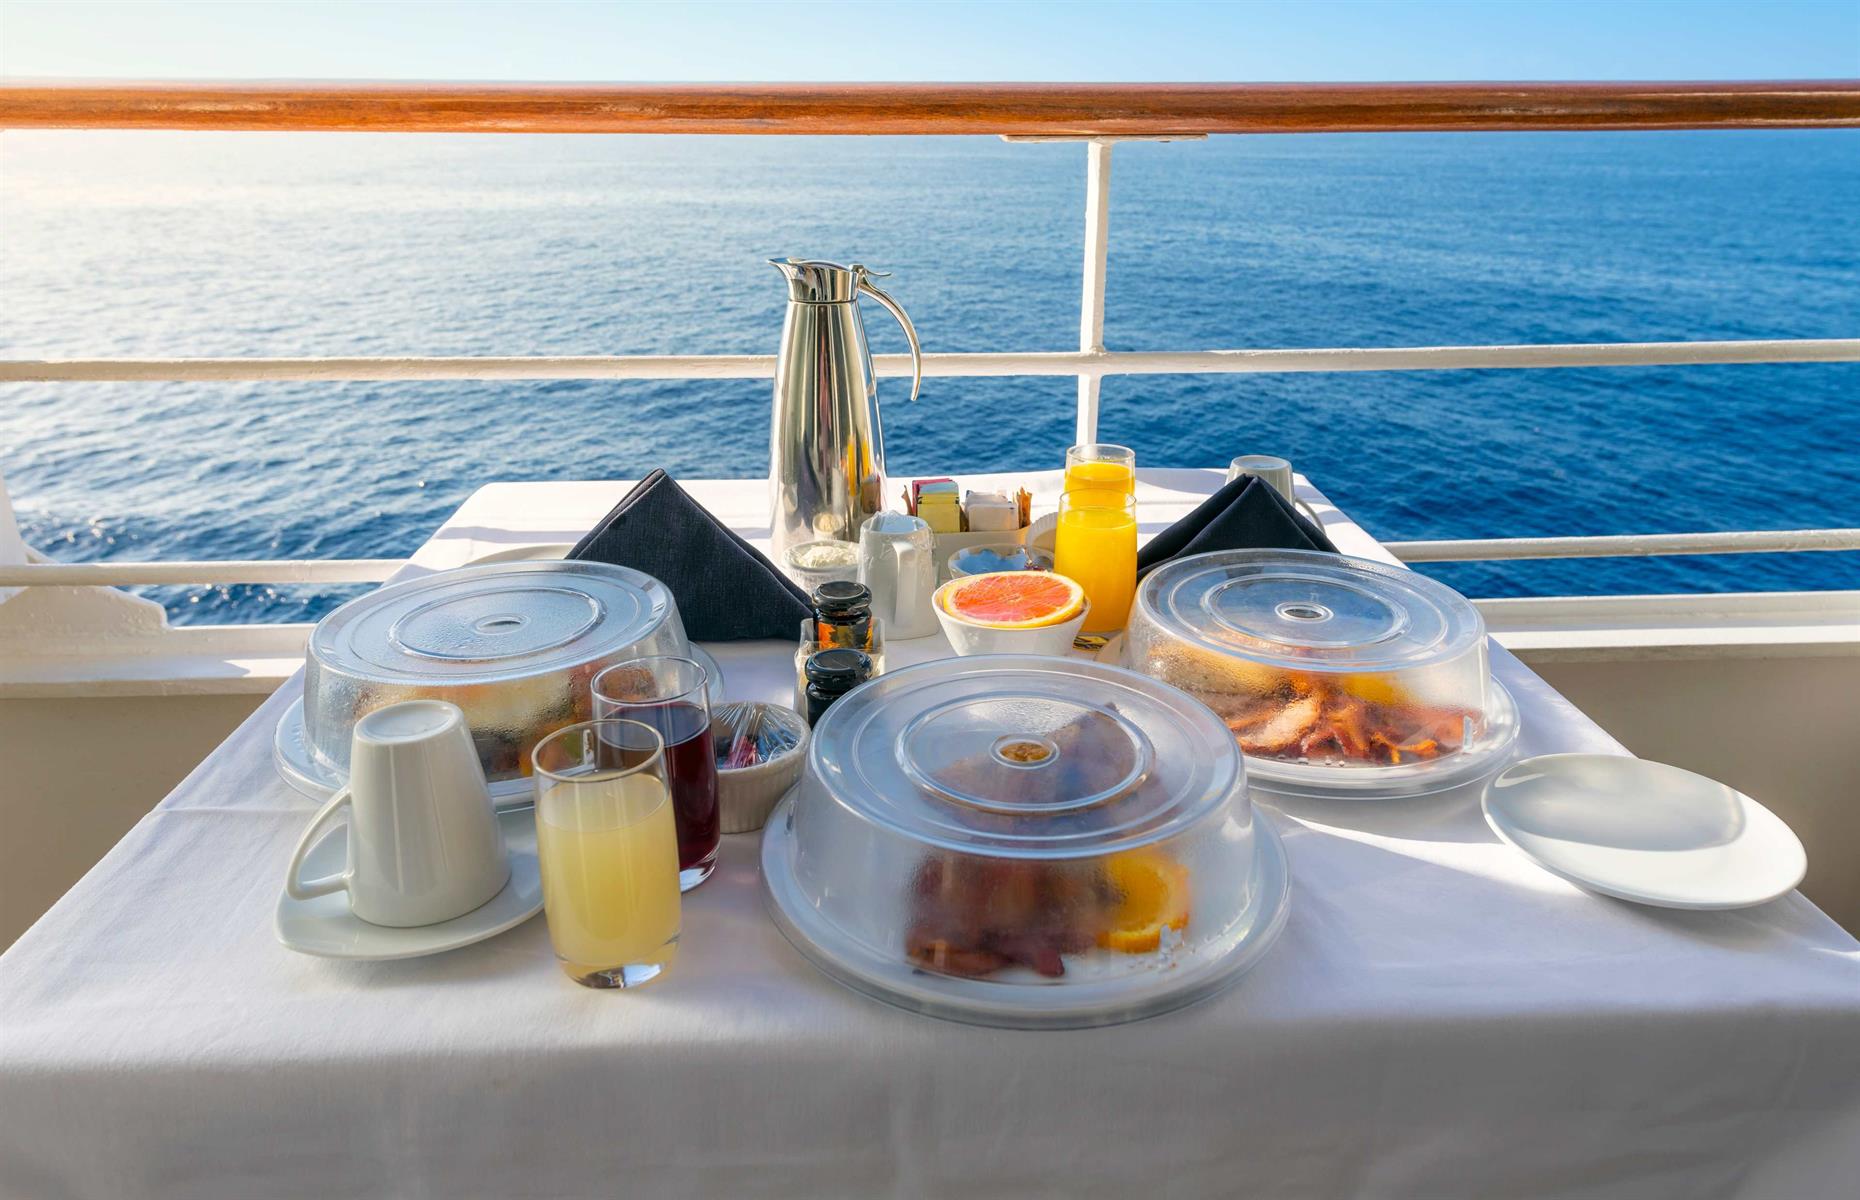 <p>Many cruise lines, such as Princess Cruises and Holland America, offer room service at no extra cost. It’s a win-win situation – you start the day with an in-room feast and the cruise line reduces overcrowding in its most popular restaurants. Windstar Cruises is just one example of a line that goes above and beyond for in-cabin dining. There are no extra charges, the service is available 24 hours a day and the menu from flagship restaurant Amphora can be ordered during dinner hours.</p>